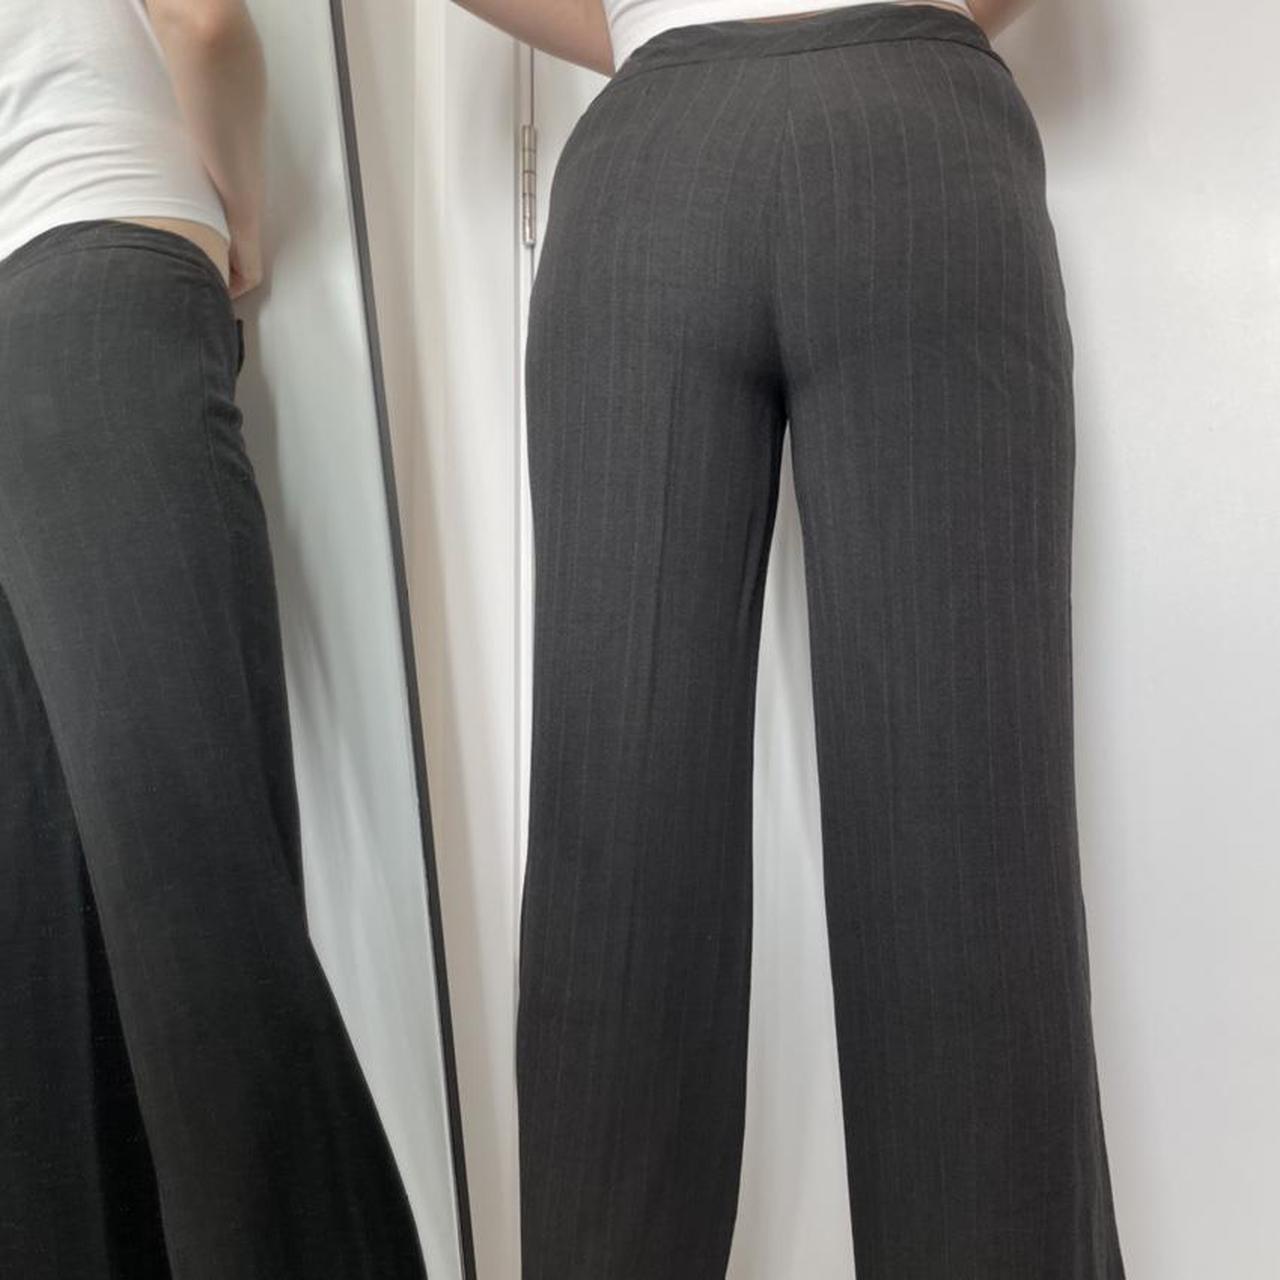 Product Image 3 - Petite pinstripe trousers

In excellent condition.

Material